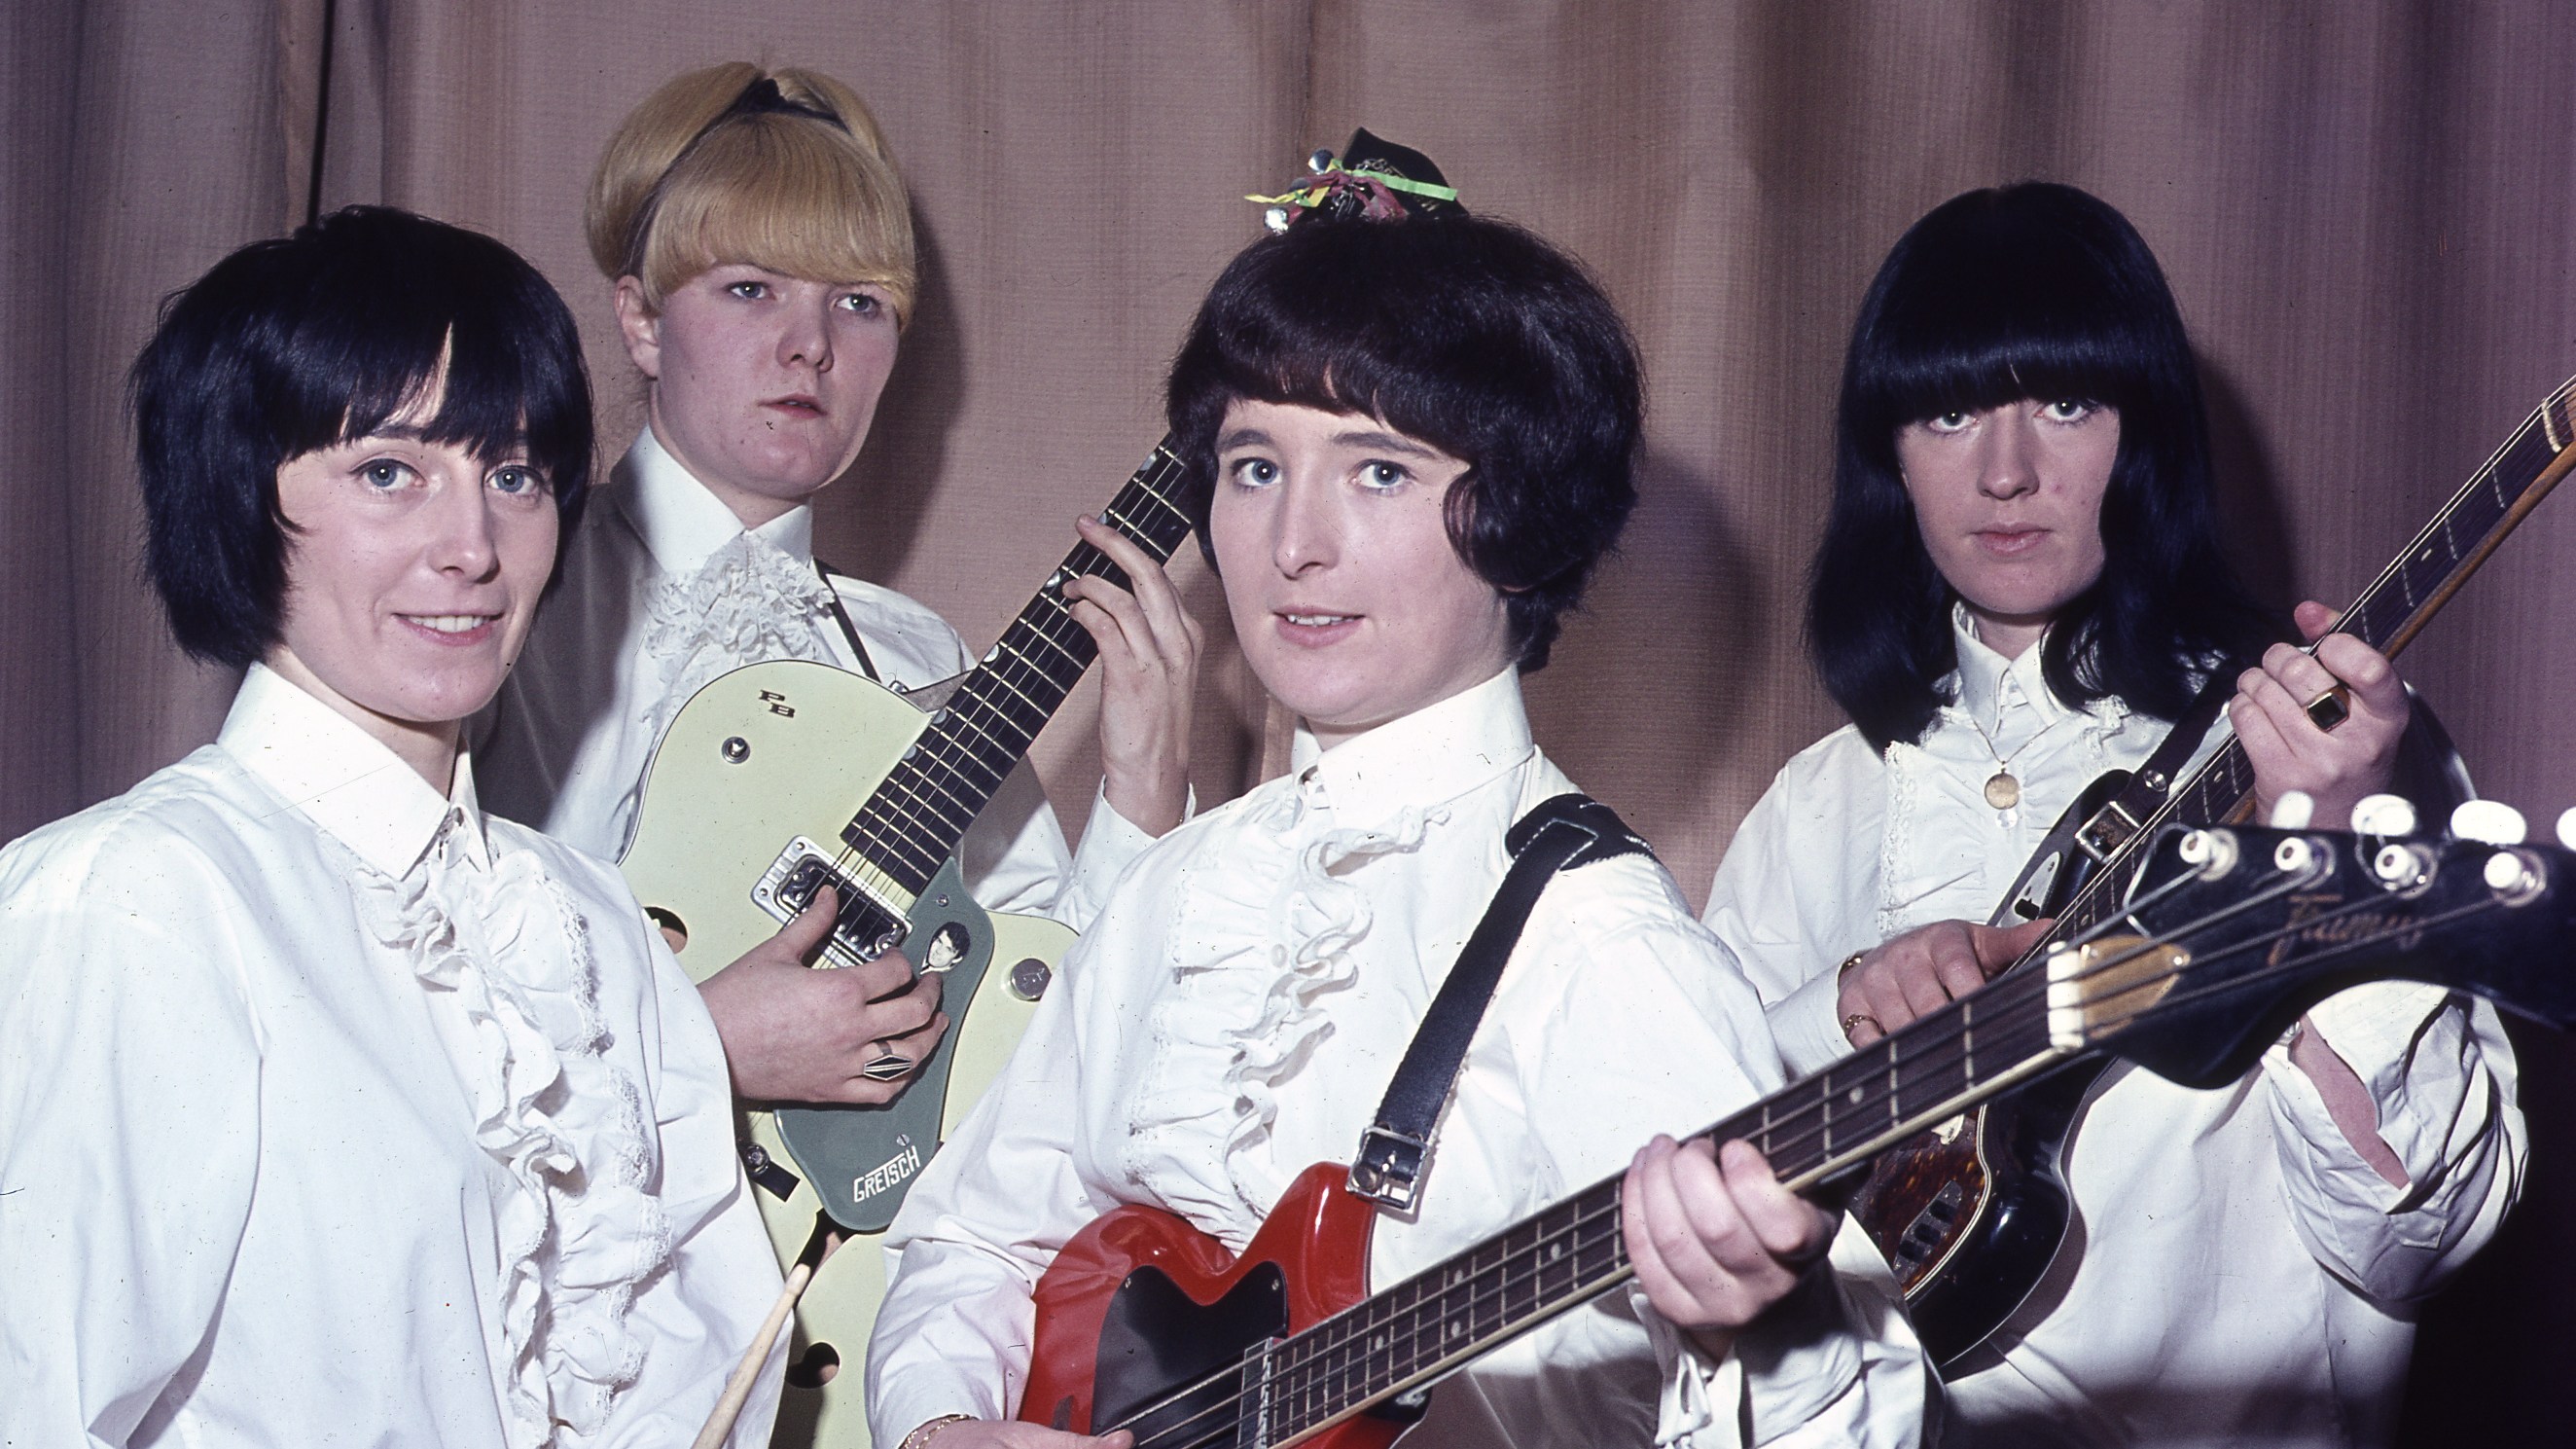 Lennon told us: ‘Girls don’t play guitars.’ We thought — we’ll show him